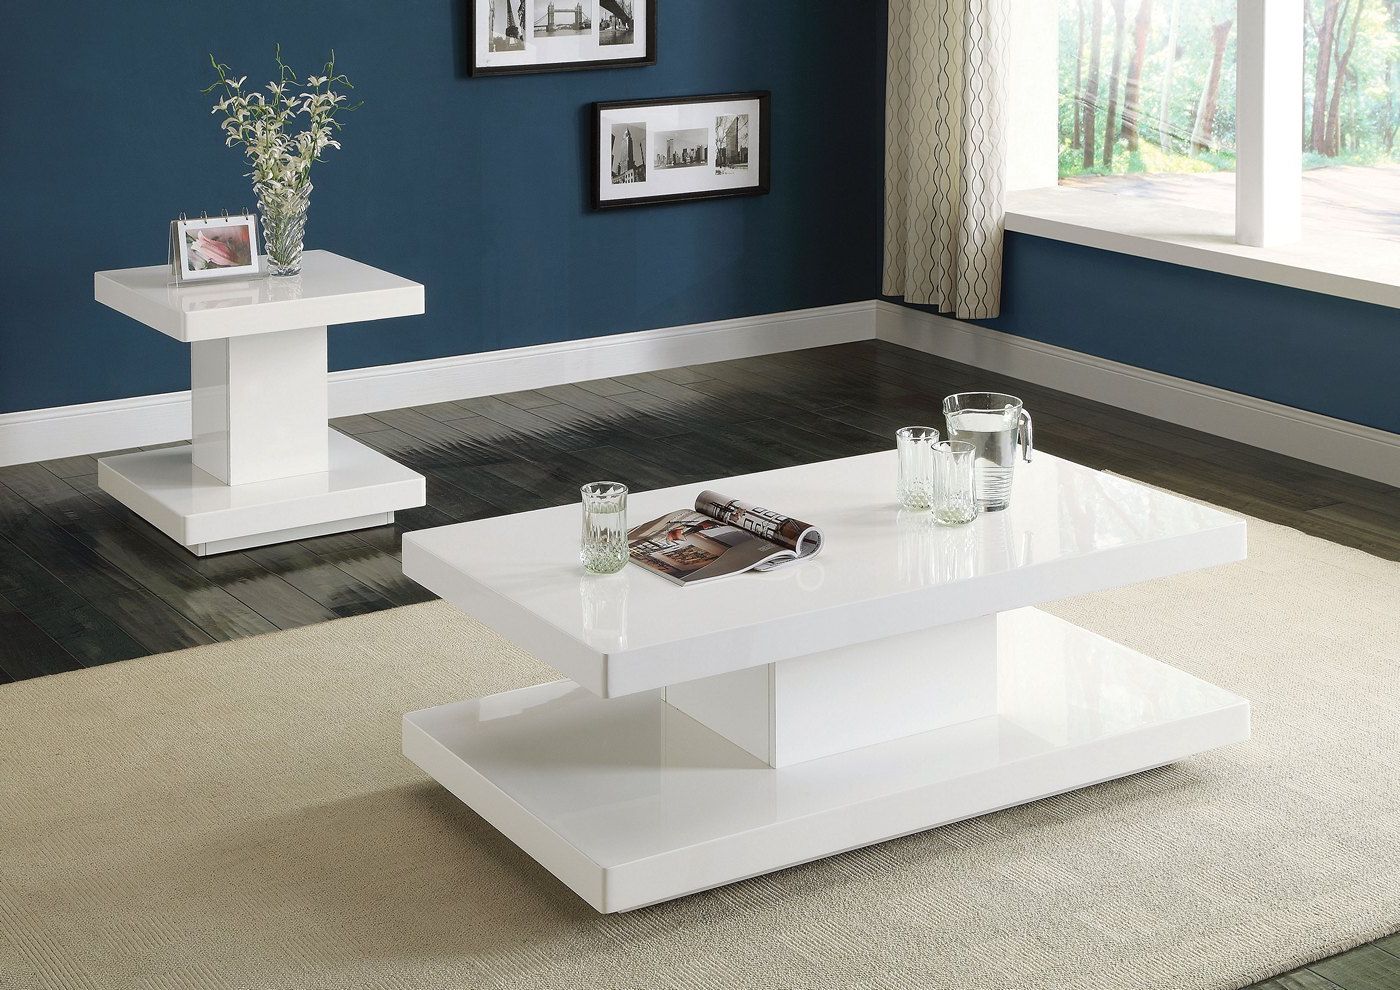 Ifama Contemporary End Table In White High Gloss Lacquer Finish Within Popular Gloss White Steel Coffee Tables (View 5 of 10)